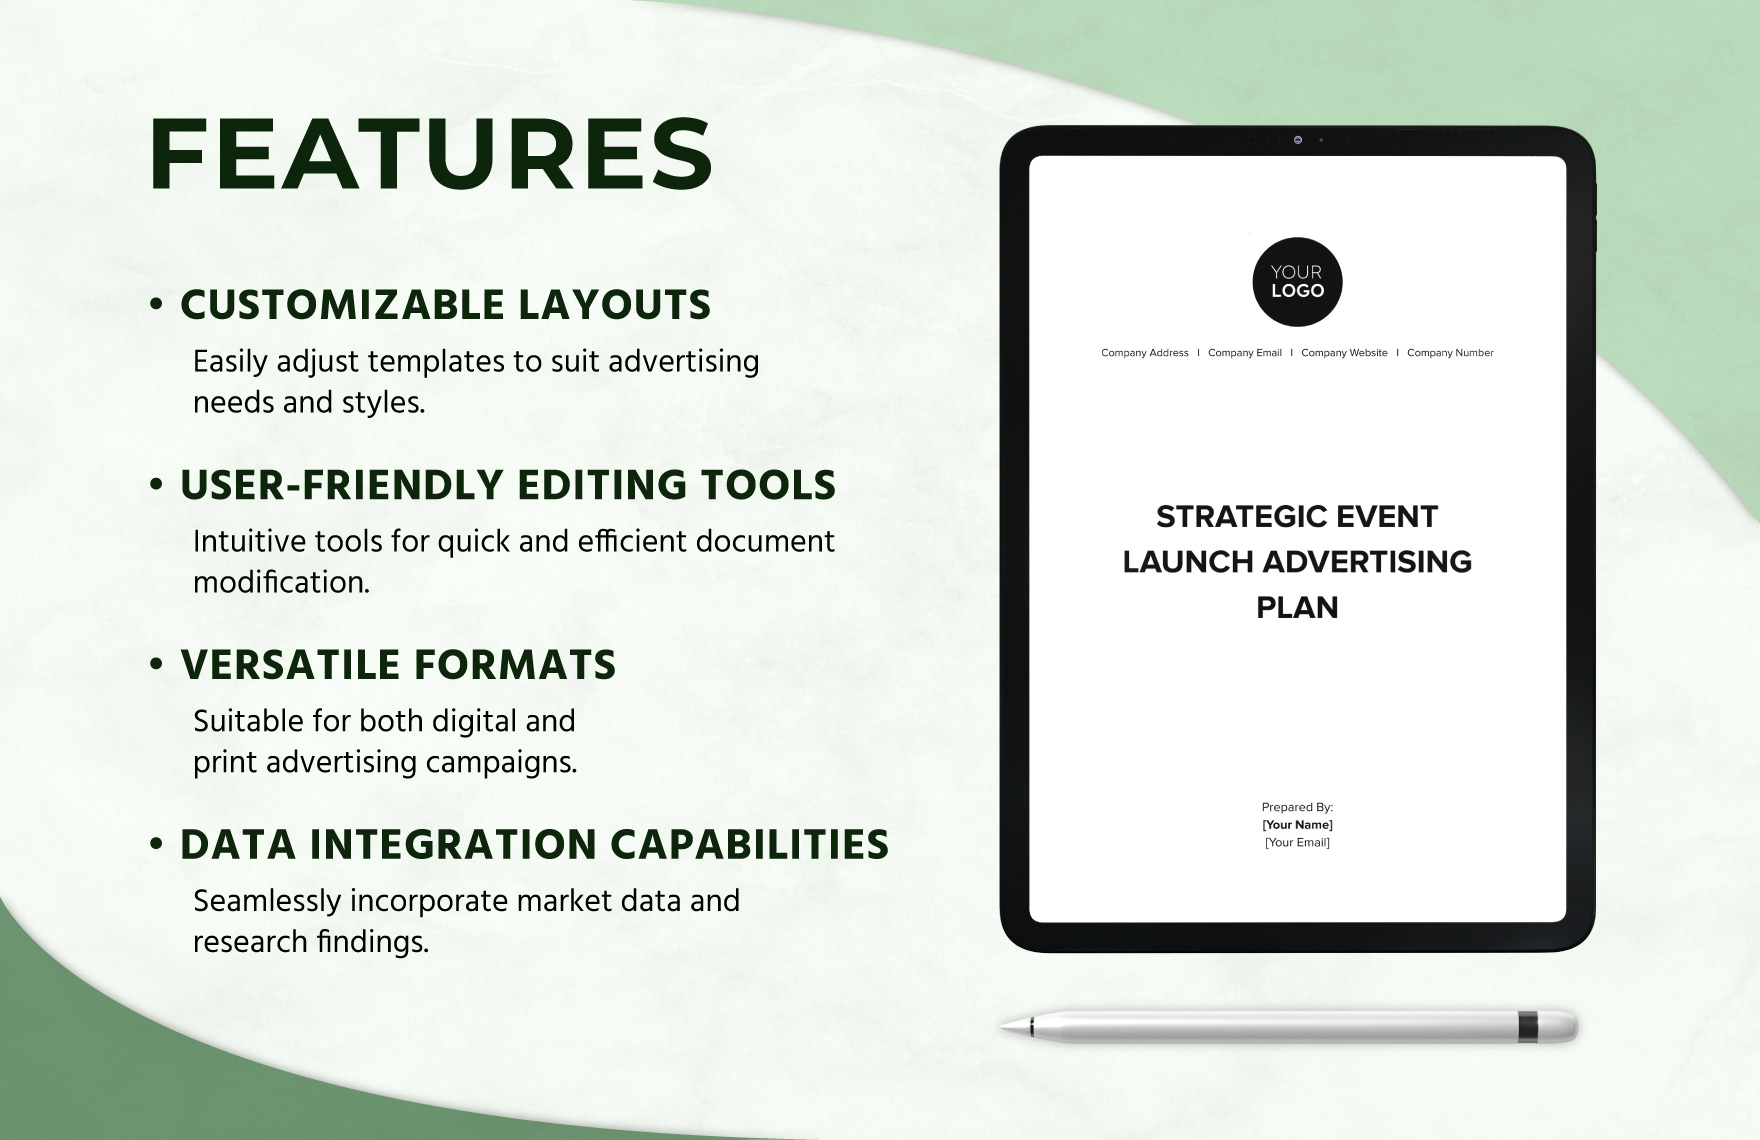 Strategic Event Launch Advertising Plan Template